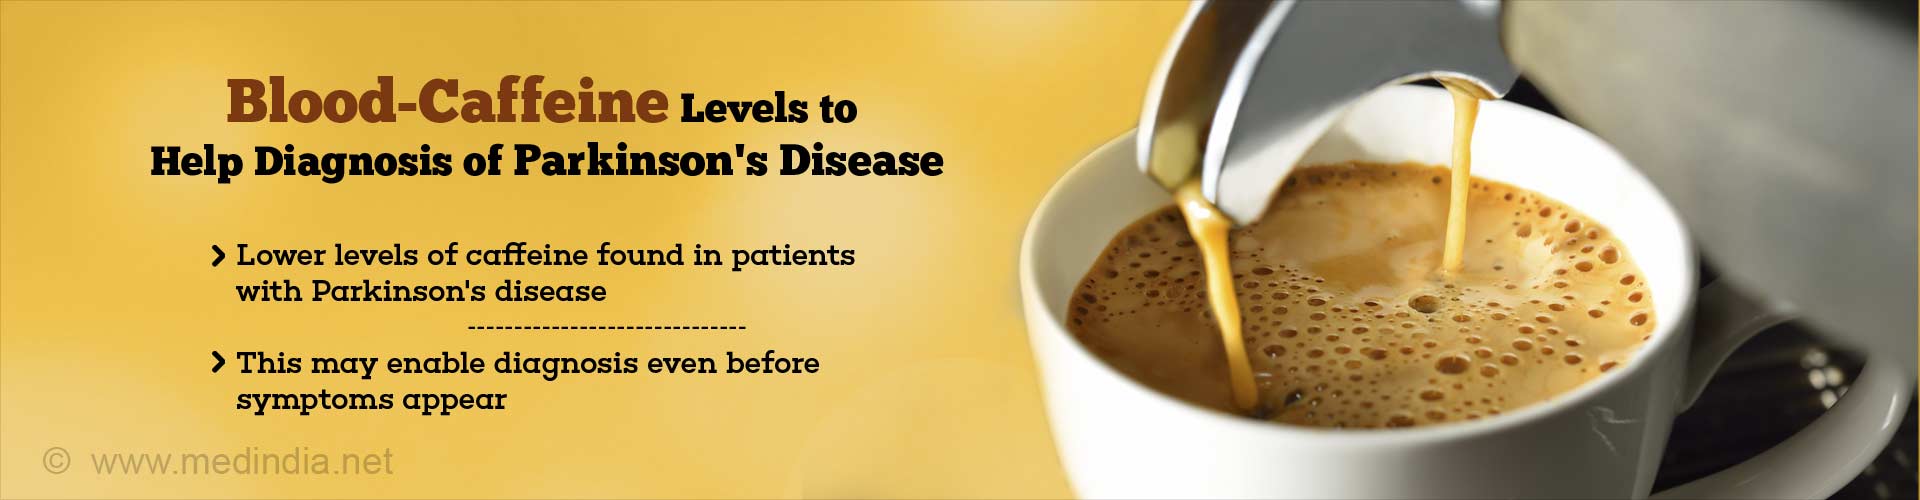 Blood-caffeine levels to help diagnosis of Parkinson's Disease
- Lower levels of caffeine found in patients with Parkinson's disease
- This may enable diagnosis even before symptoms appear